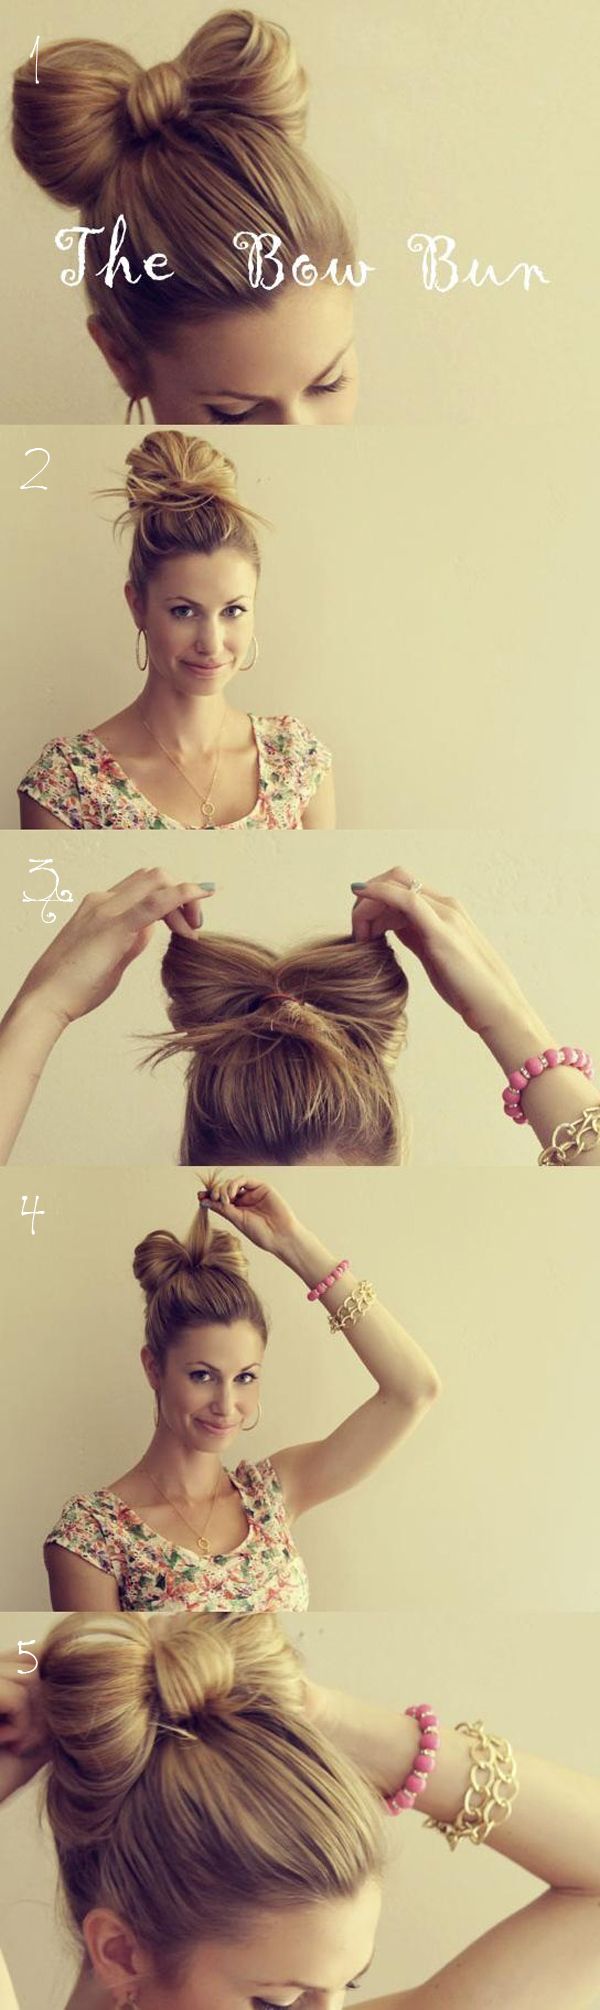 Long Hairstyles for Girls Step By Step Tutorial & Trends with Pictures (17)